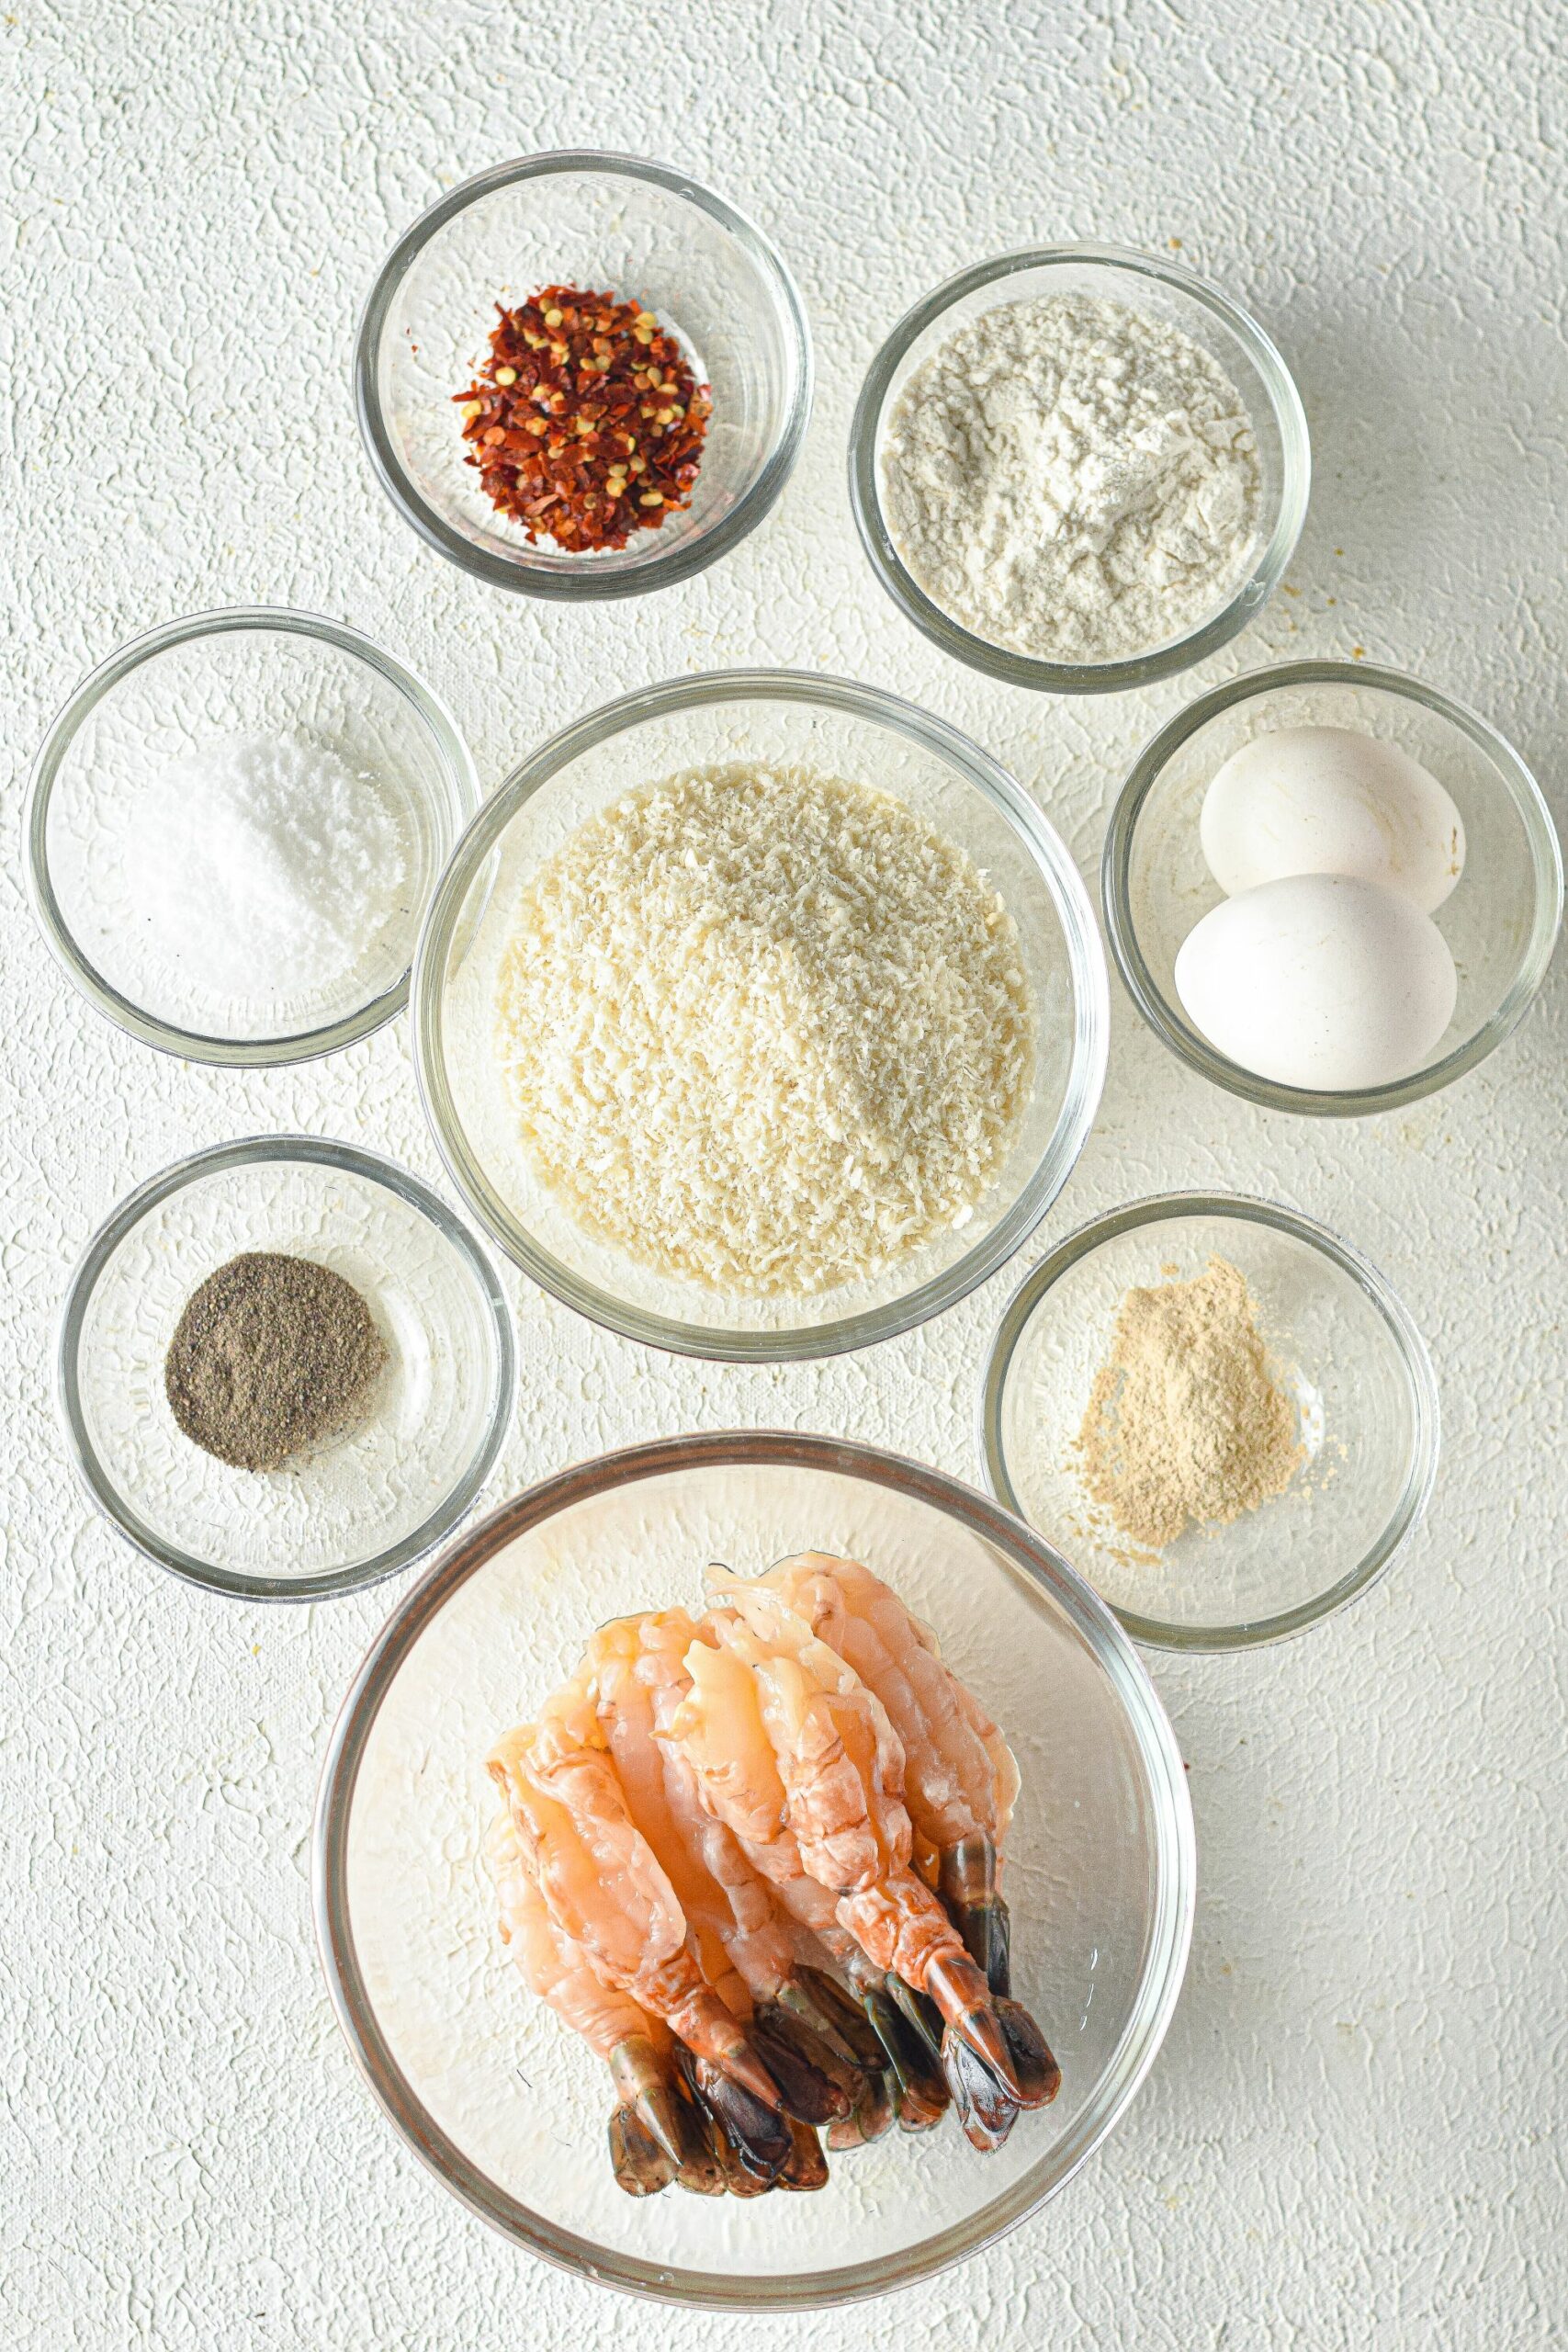 All the ingredients for the shrimp dish.